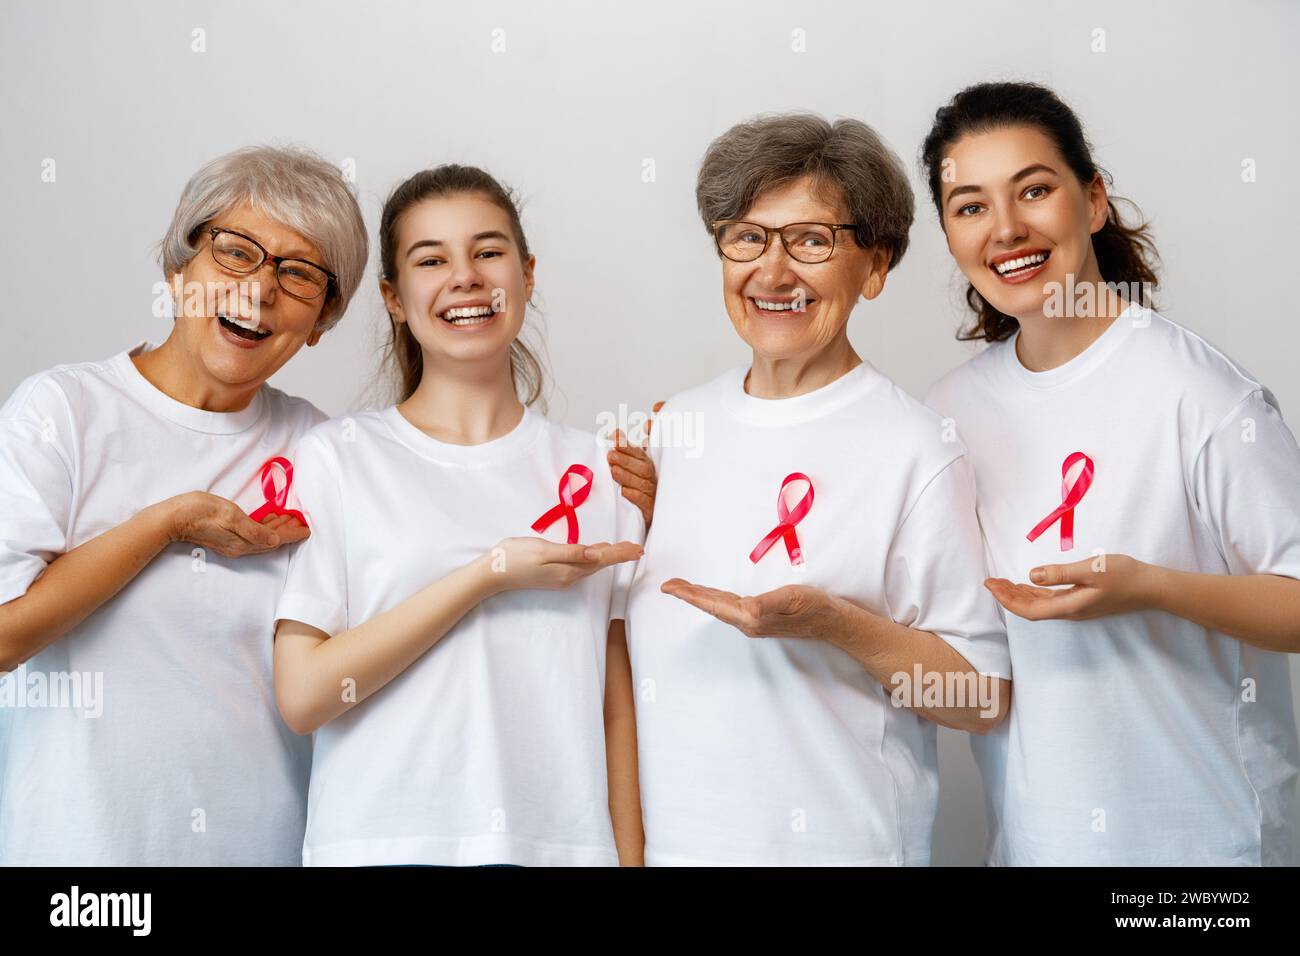 Smiling women with pink satin ribbon symbolizing concept of illness awareness, expressing solidarity and support for cancer patients and survivors. Di Stock Photo